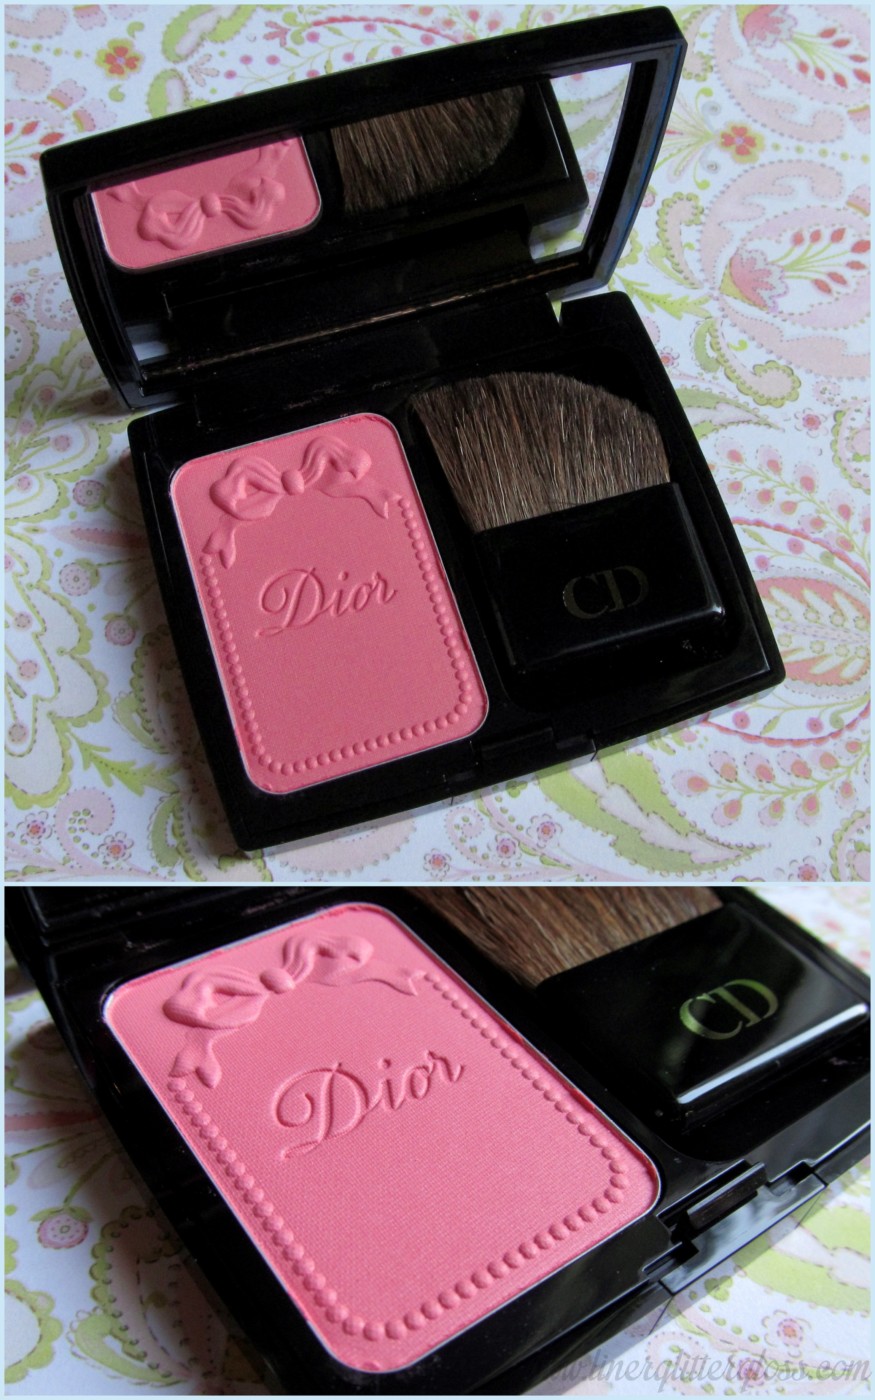 Dior 001 FAVORITE Makeup Palette Swatches, Review & FOTD – Trianon